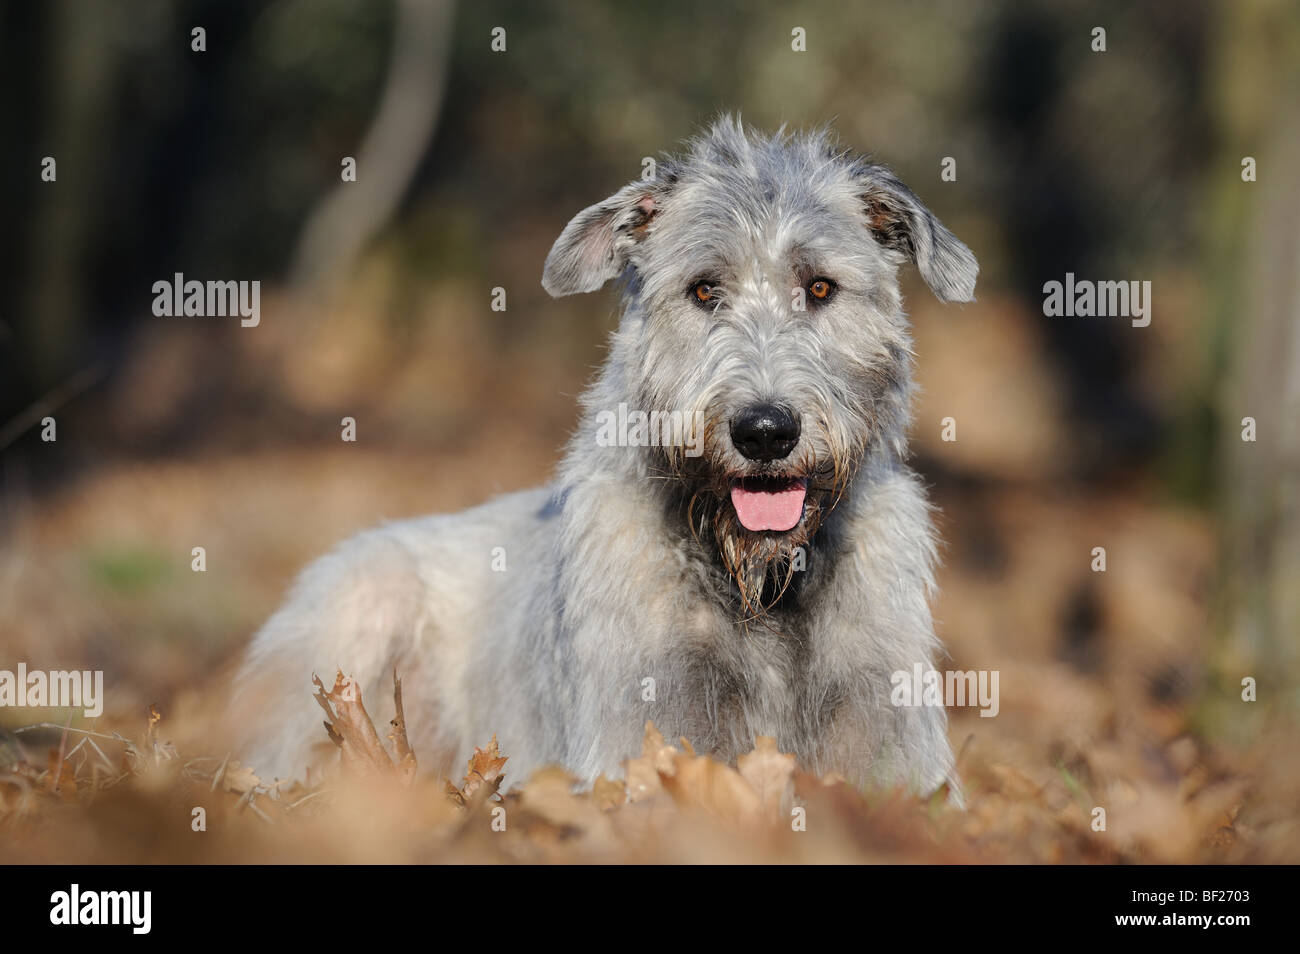 Irish Wolfhound (Canis lupus familiaris), adult lying in autumn leaves. Stock Photo